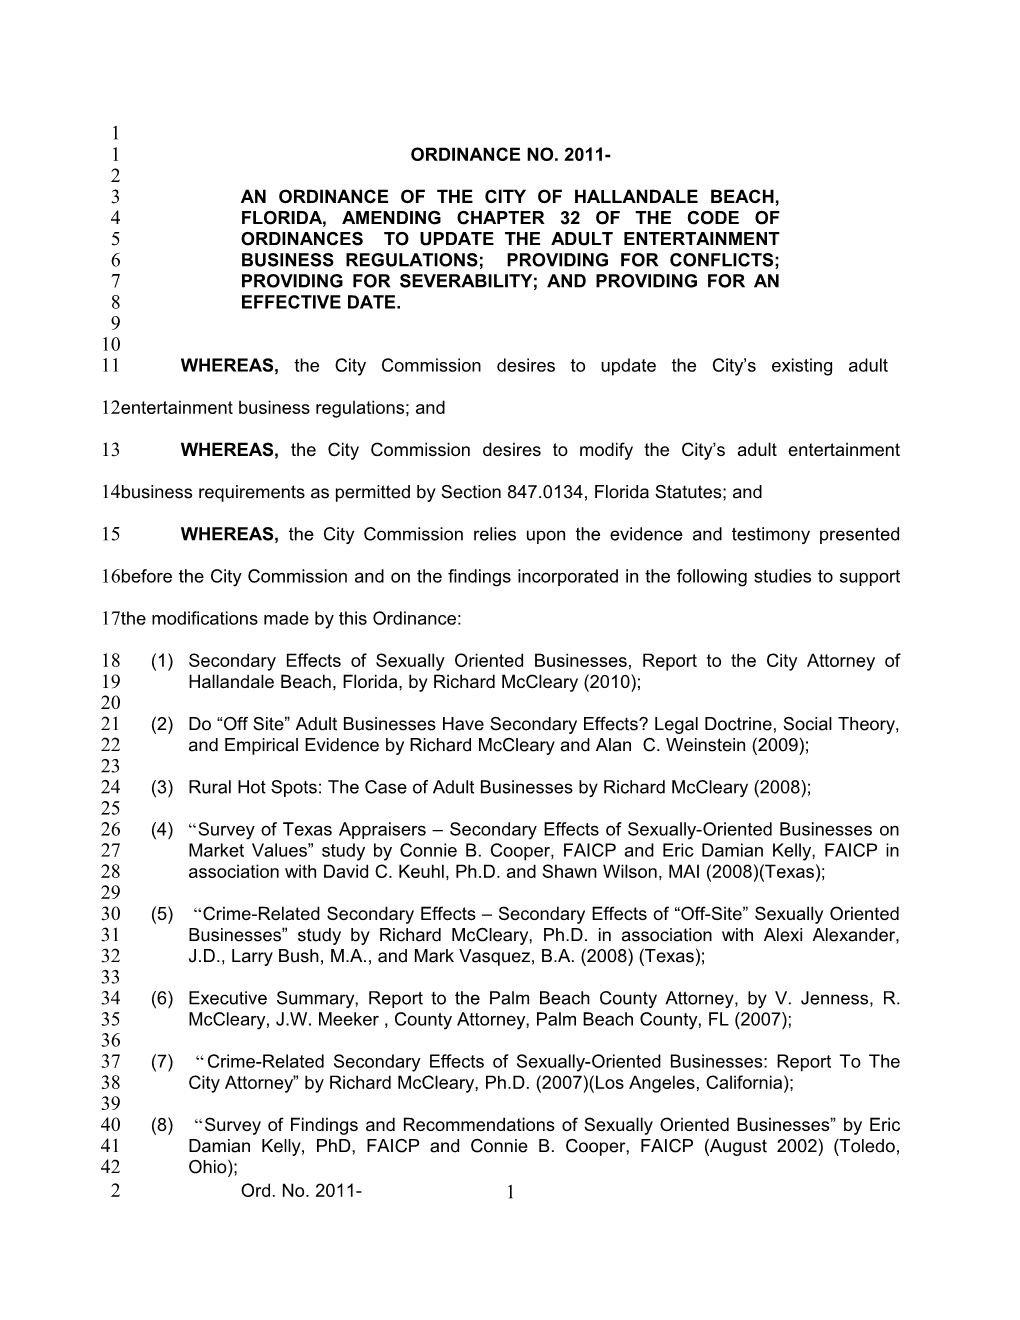 An Ordinance of the City of Hallandale Beach, Florida, Amending Chapter 32 of the Code